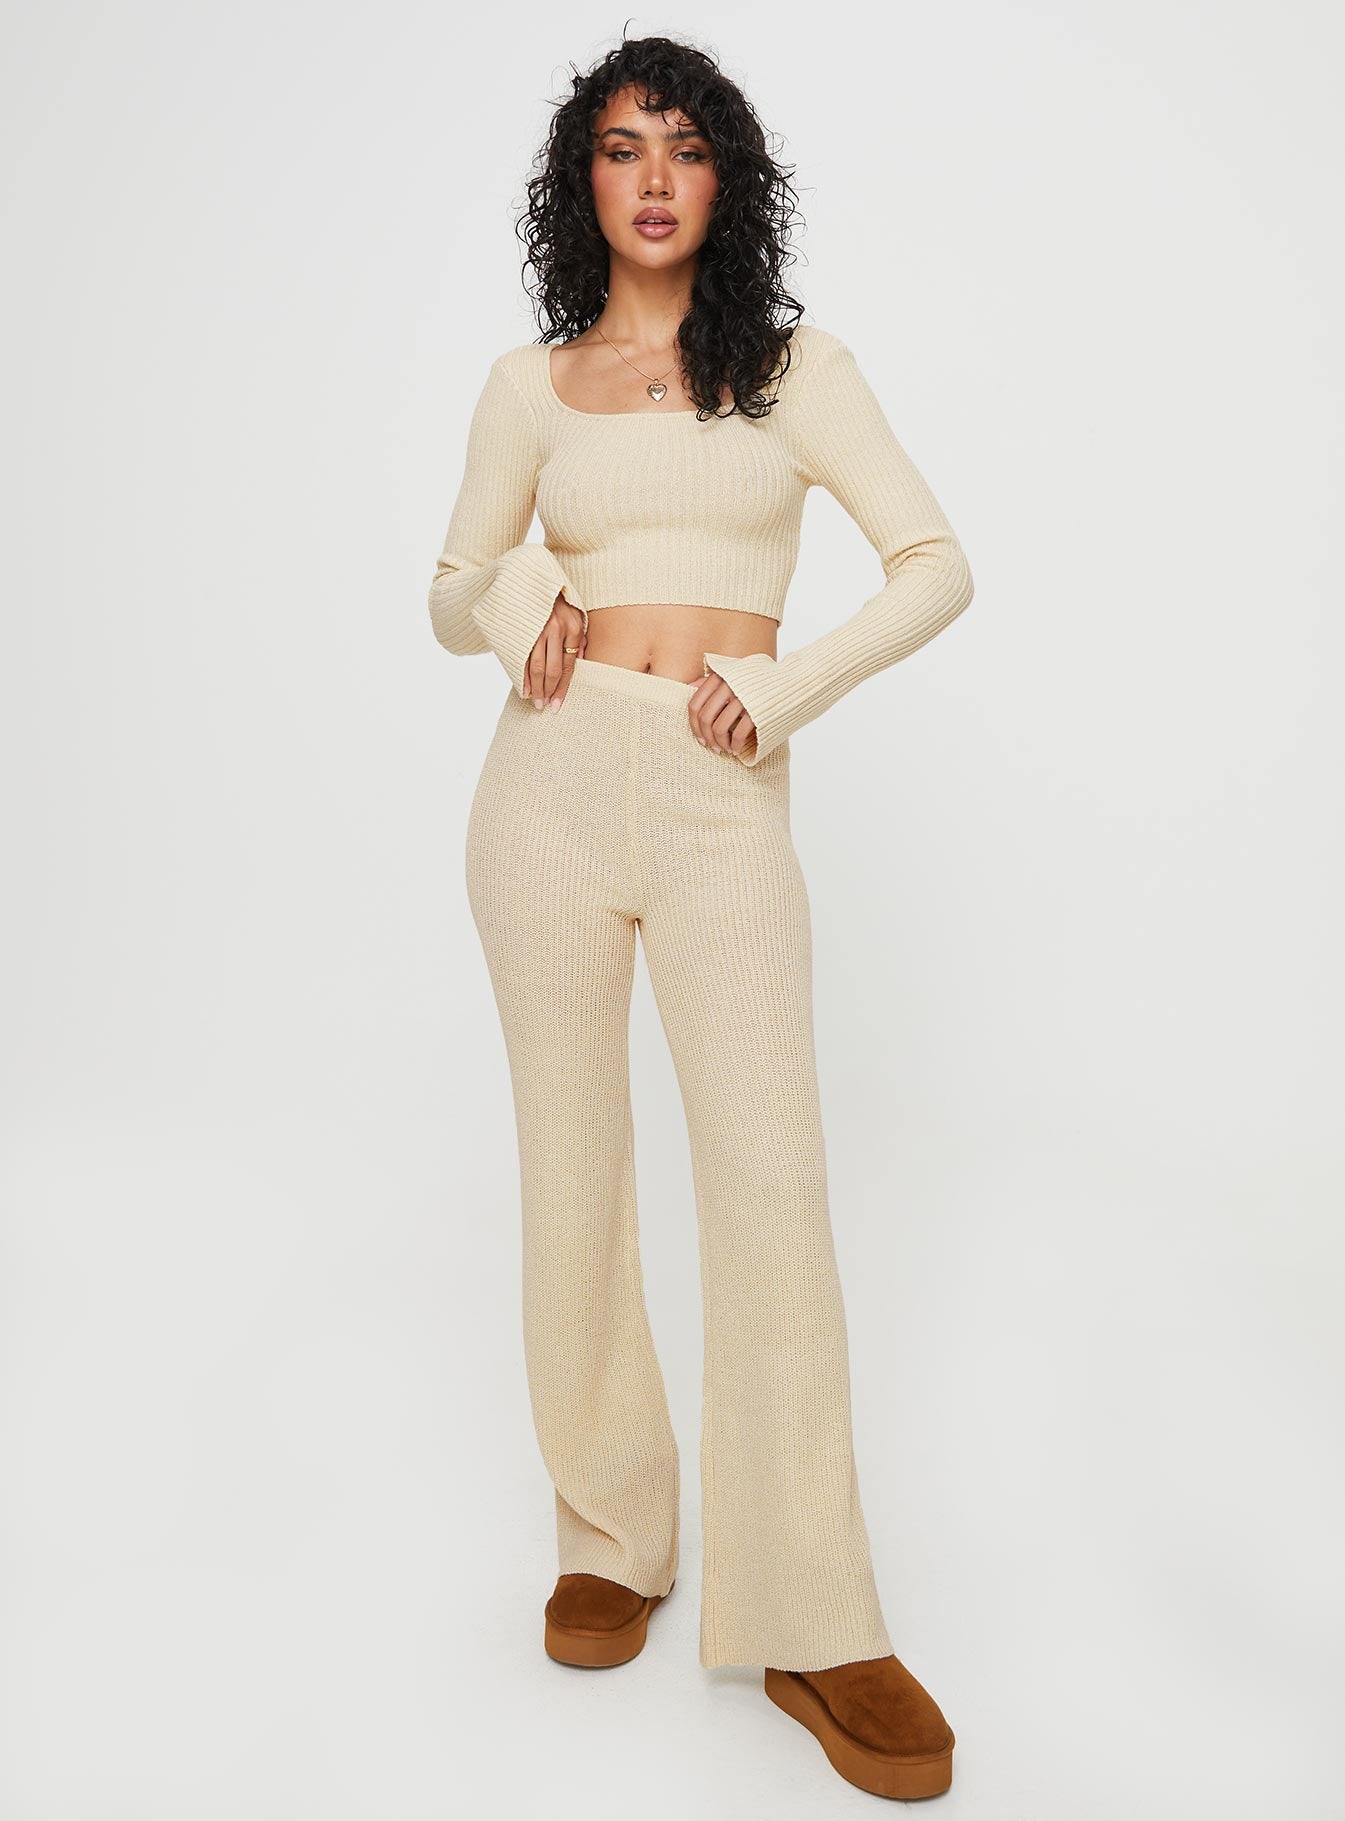 Antthony 2-piece Knit Bell-Sleeve Top and Pant Set - 20738651